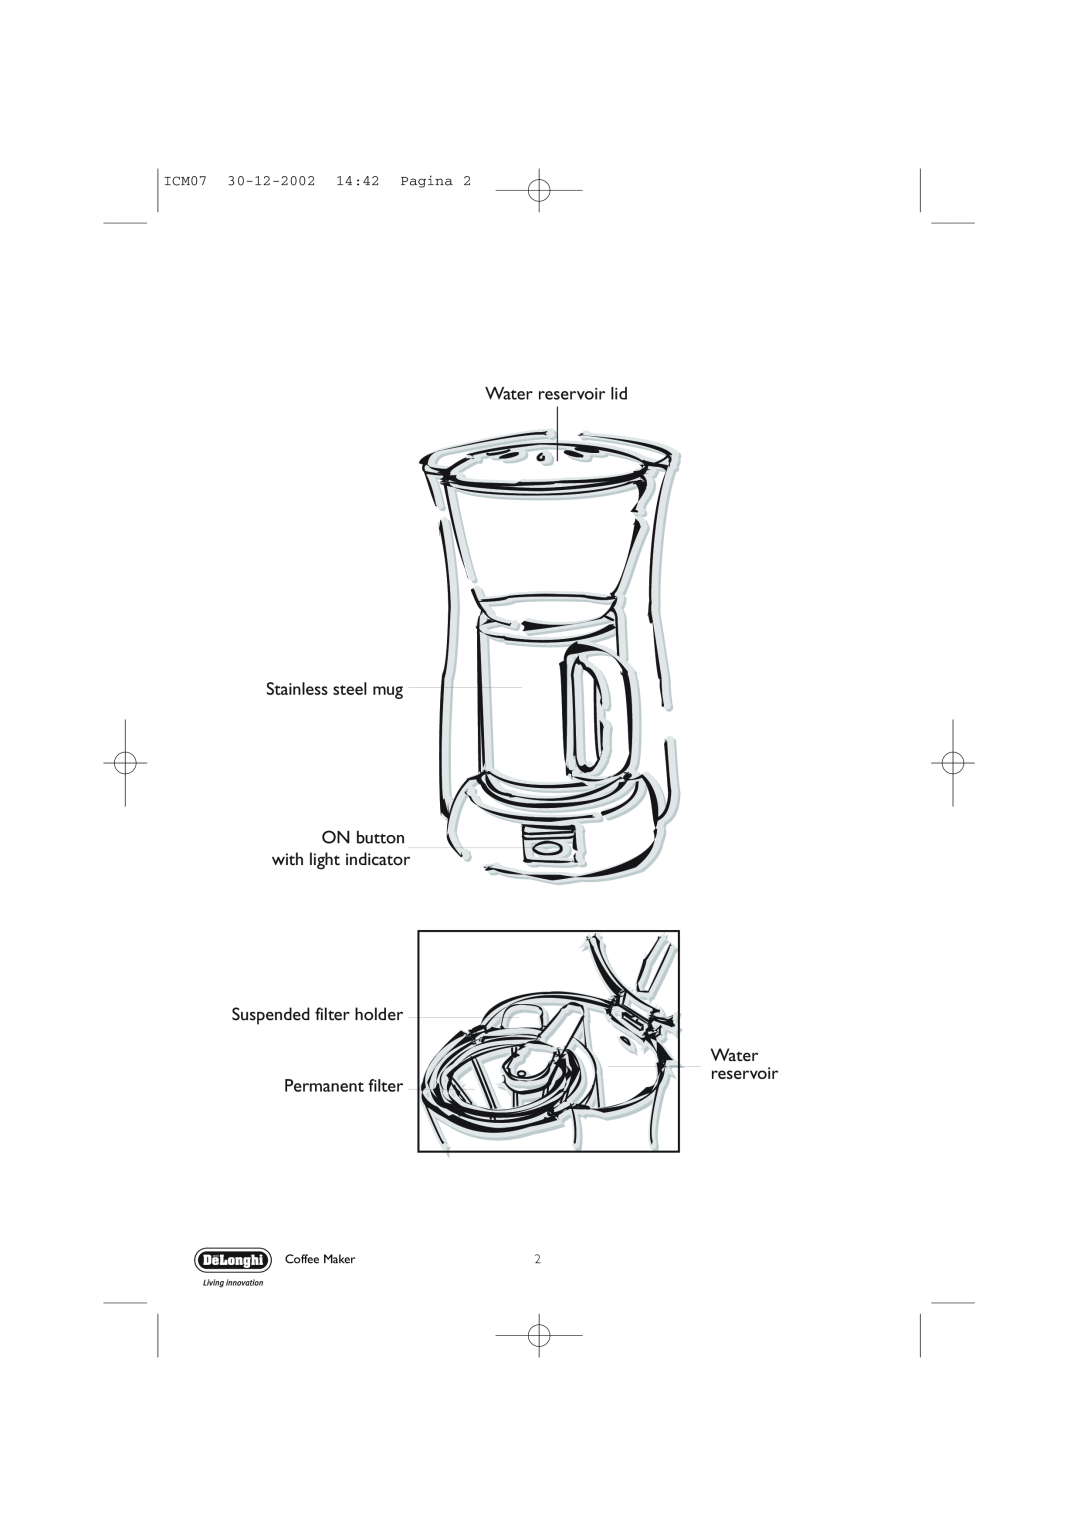 DeLonghi N/A manual Water reservoir lid, Stainless steel mug ON button with light indicator, ICM07 30-12-2002 1442 Pagina 